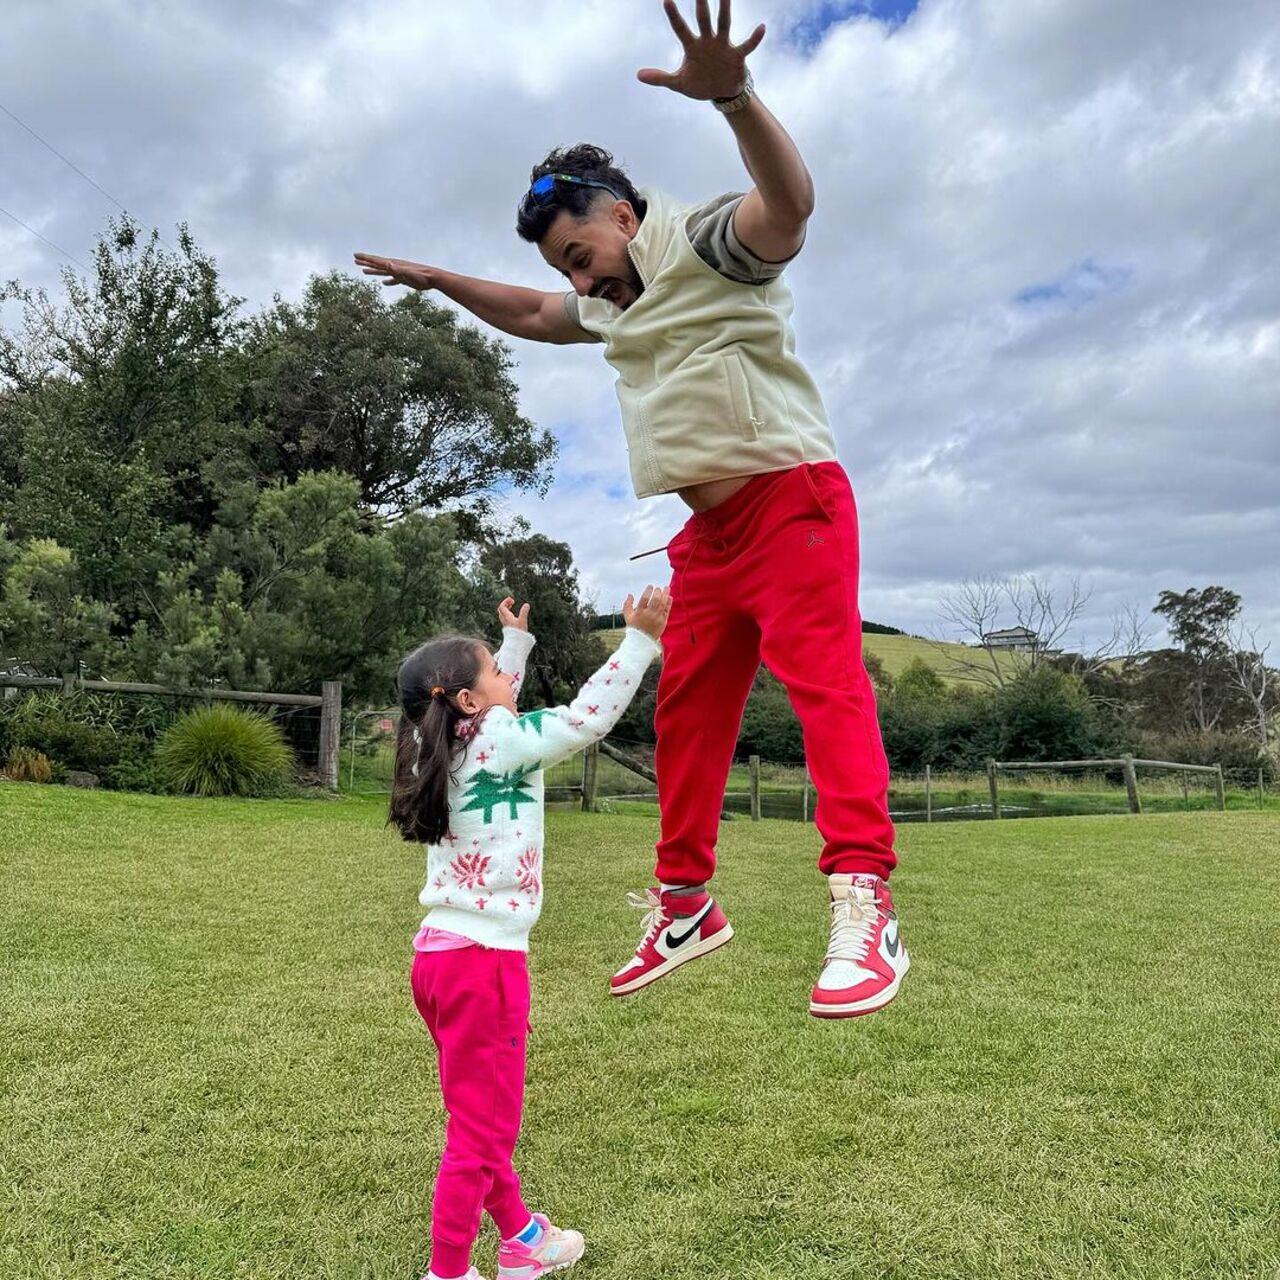 After her father flung her in the air, it was little Inaaya's turn to show her power, and daddy Kunal played his part in entertaining his daughter